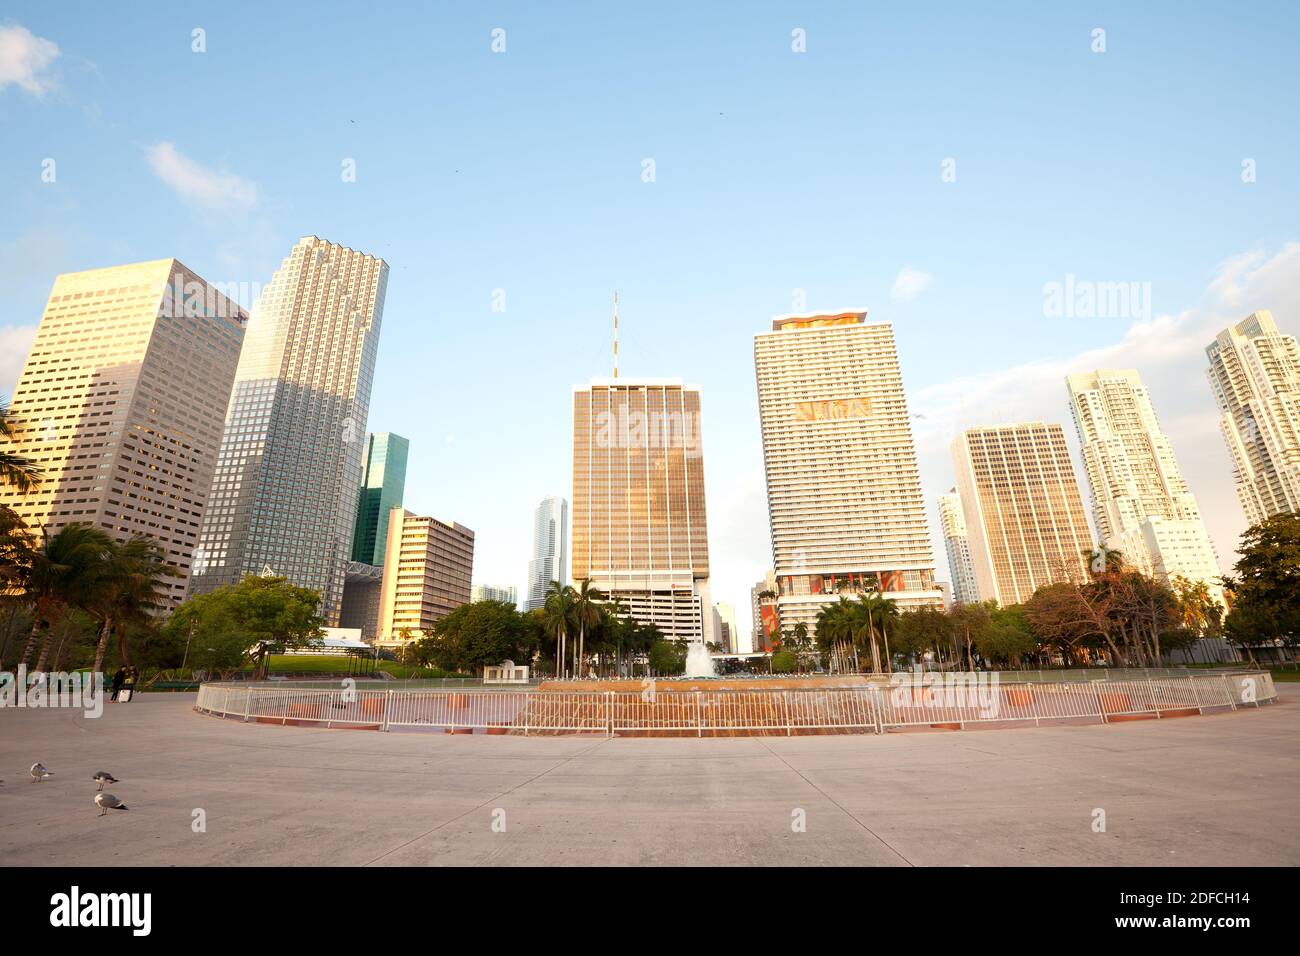 Miami, Florida, United States - Fountain at Bayfront Park and skyline of buildings at downtown Miami. Stock Photo